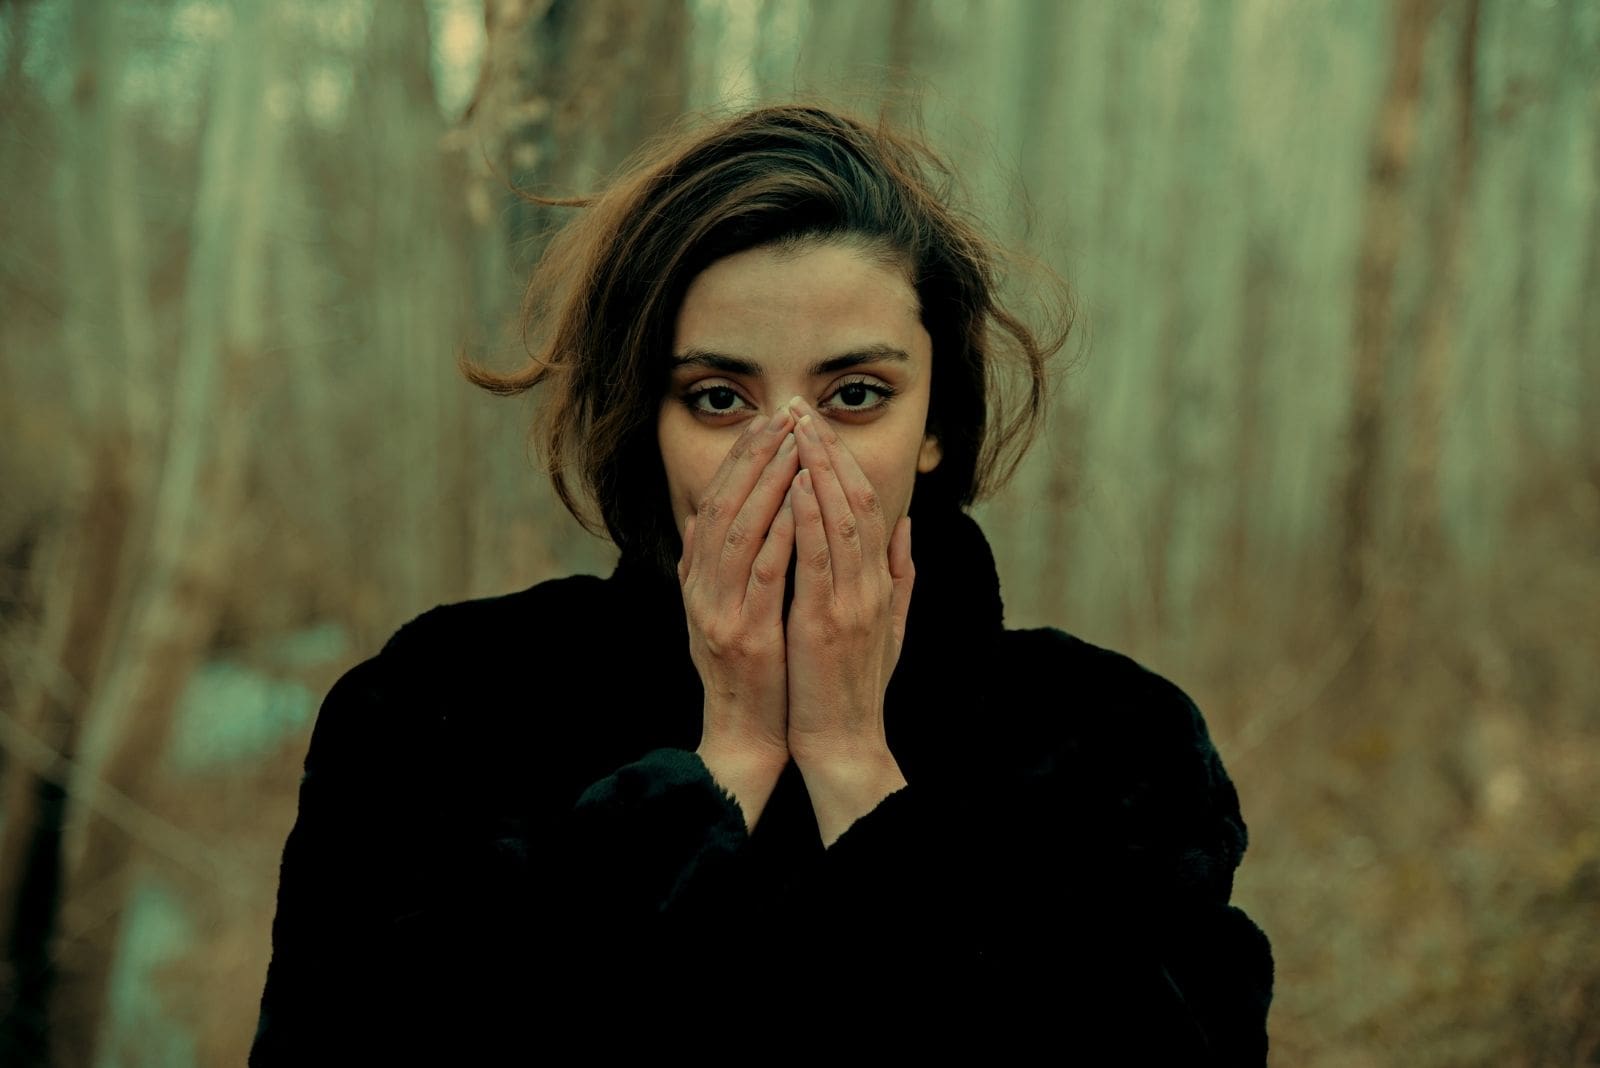 pensive woman in black coat covering her face with her hands standing outdoors